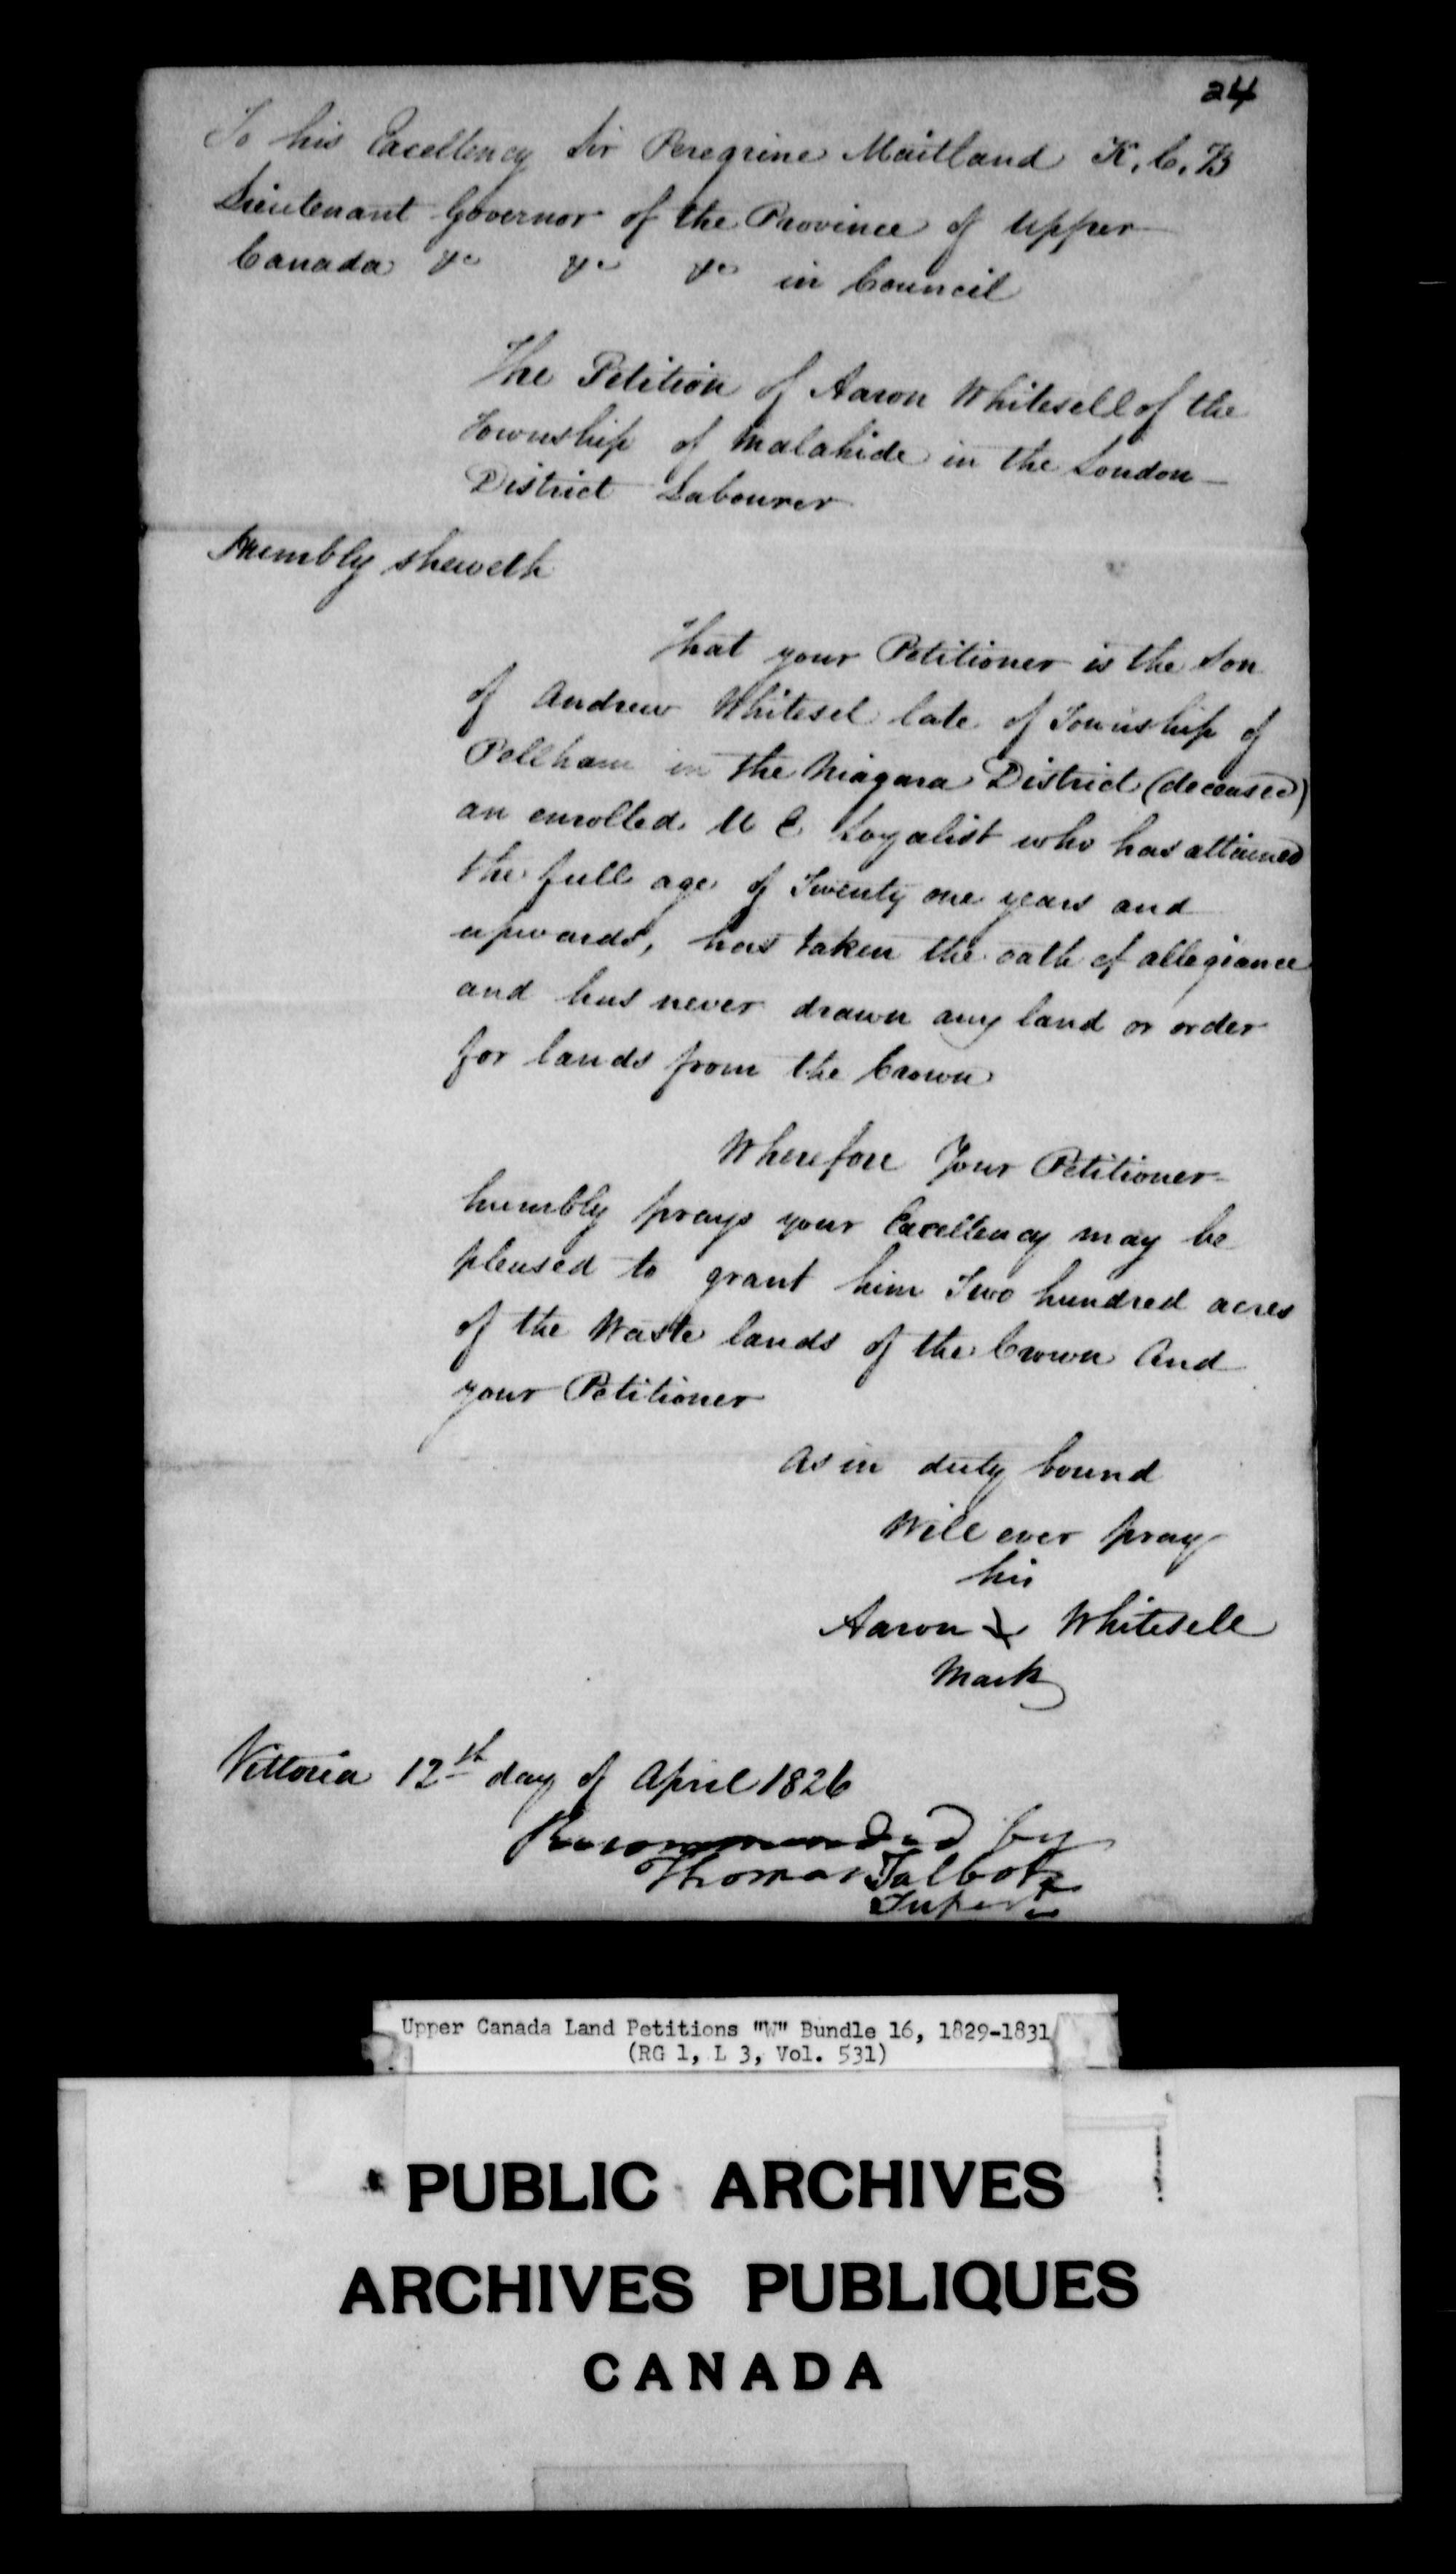 Title: Upper Canada Land Petitions (1763-1865) - Mikan Number: 205131 - Microform: c-2956